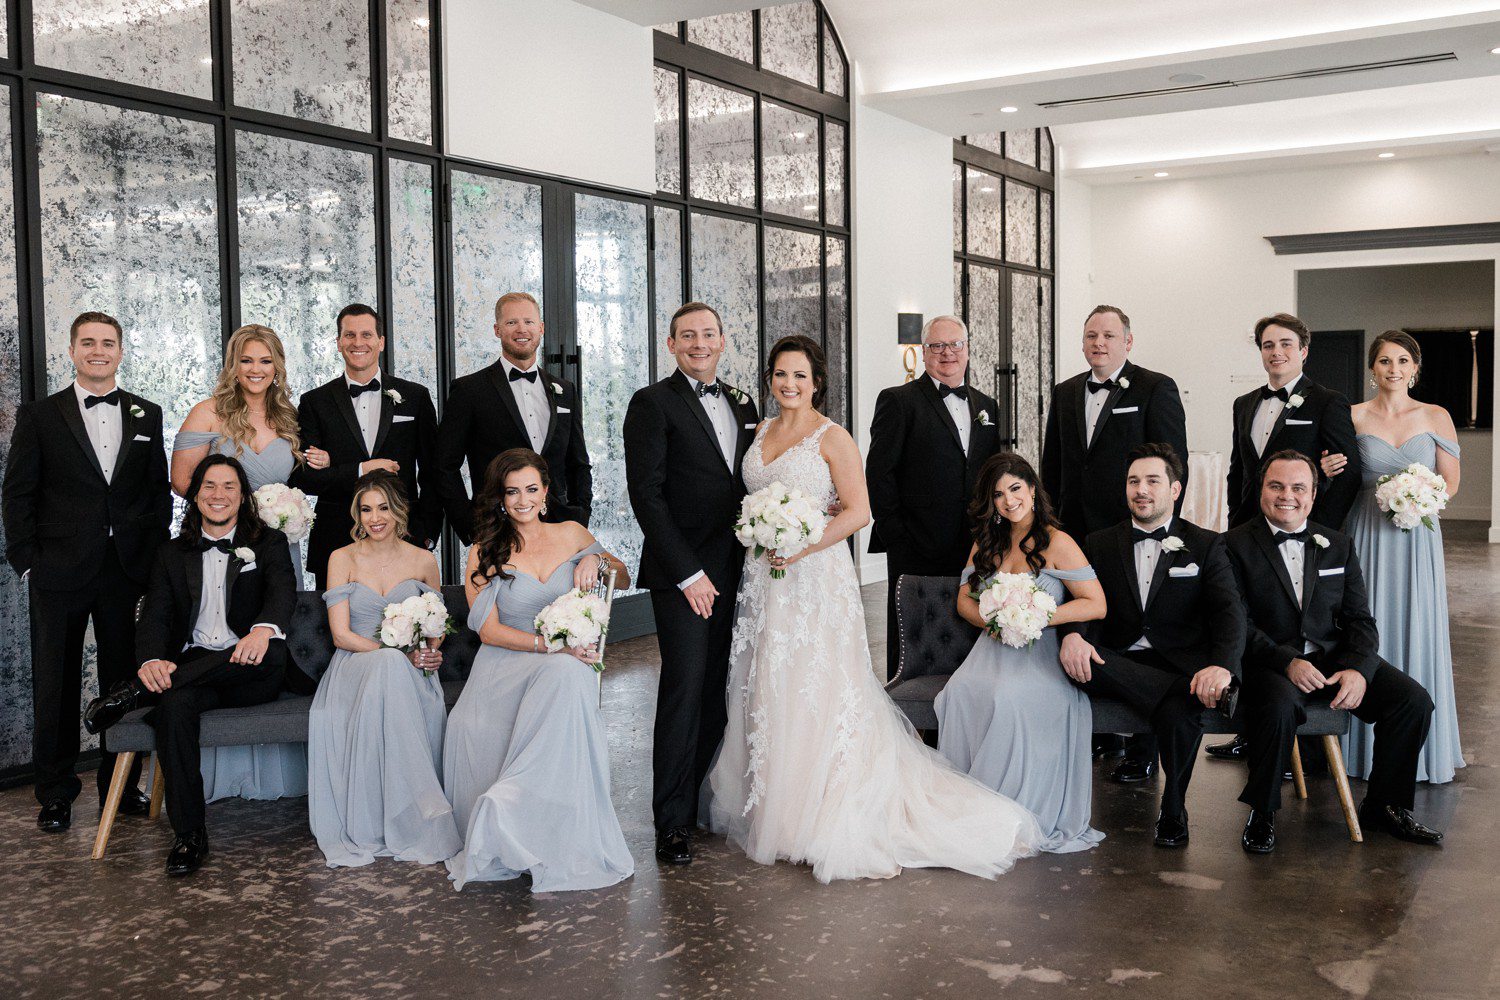 Wedding Party Photos at The Revaire